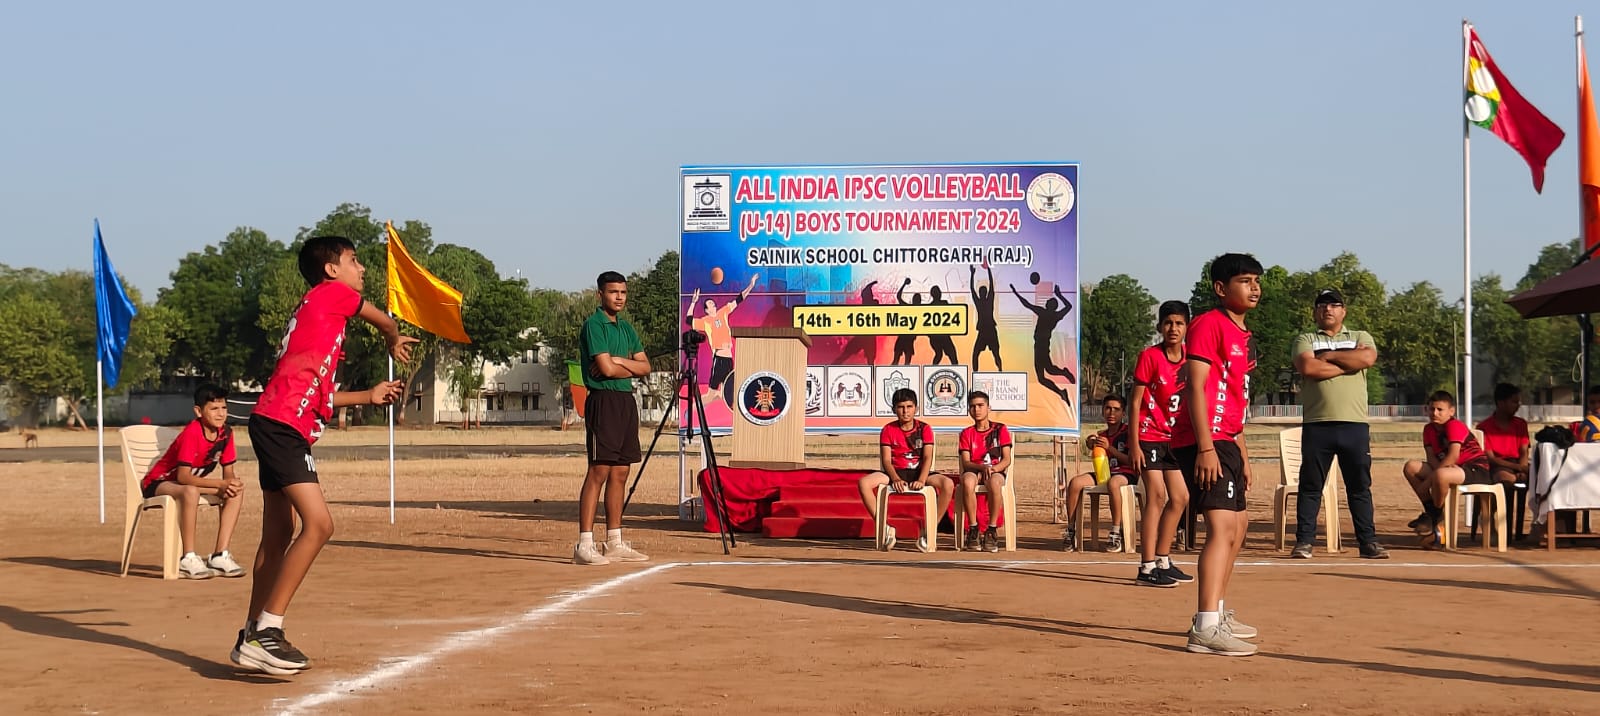 Second day : All India IPSC Volleyball Tournament 2024